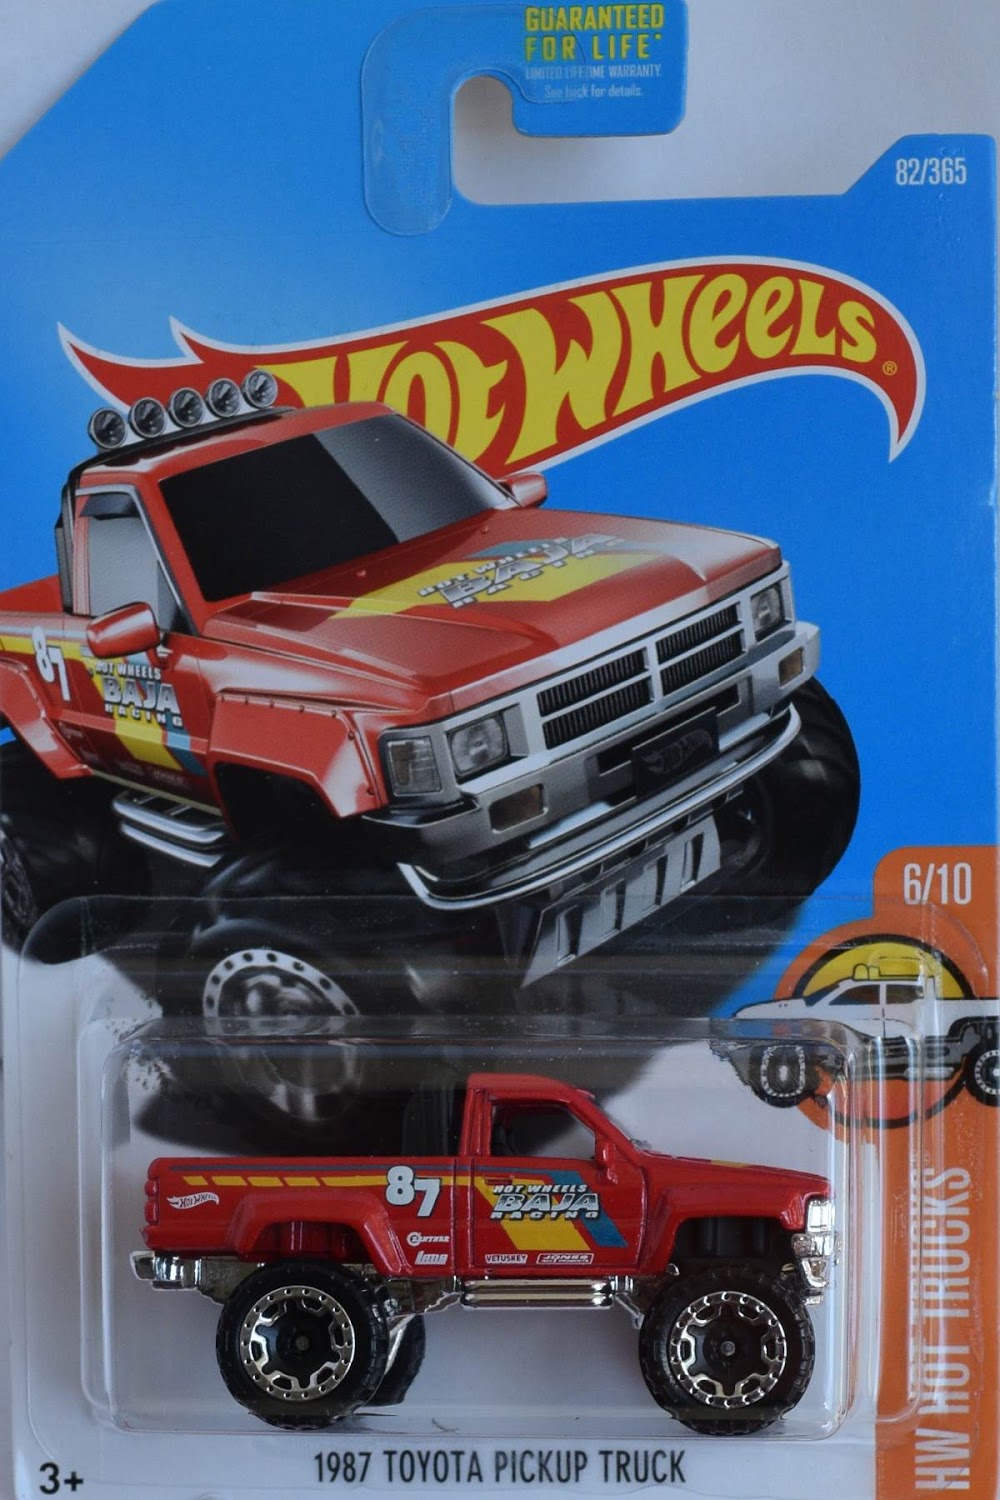 Toyota Pickup Truck 87 cover